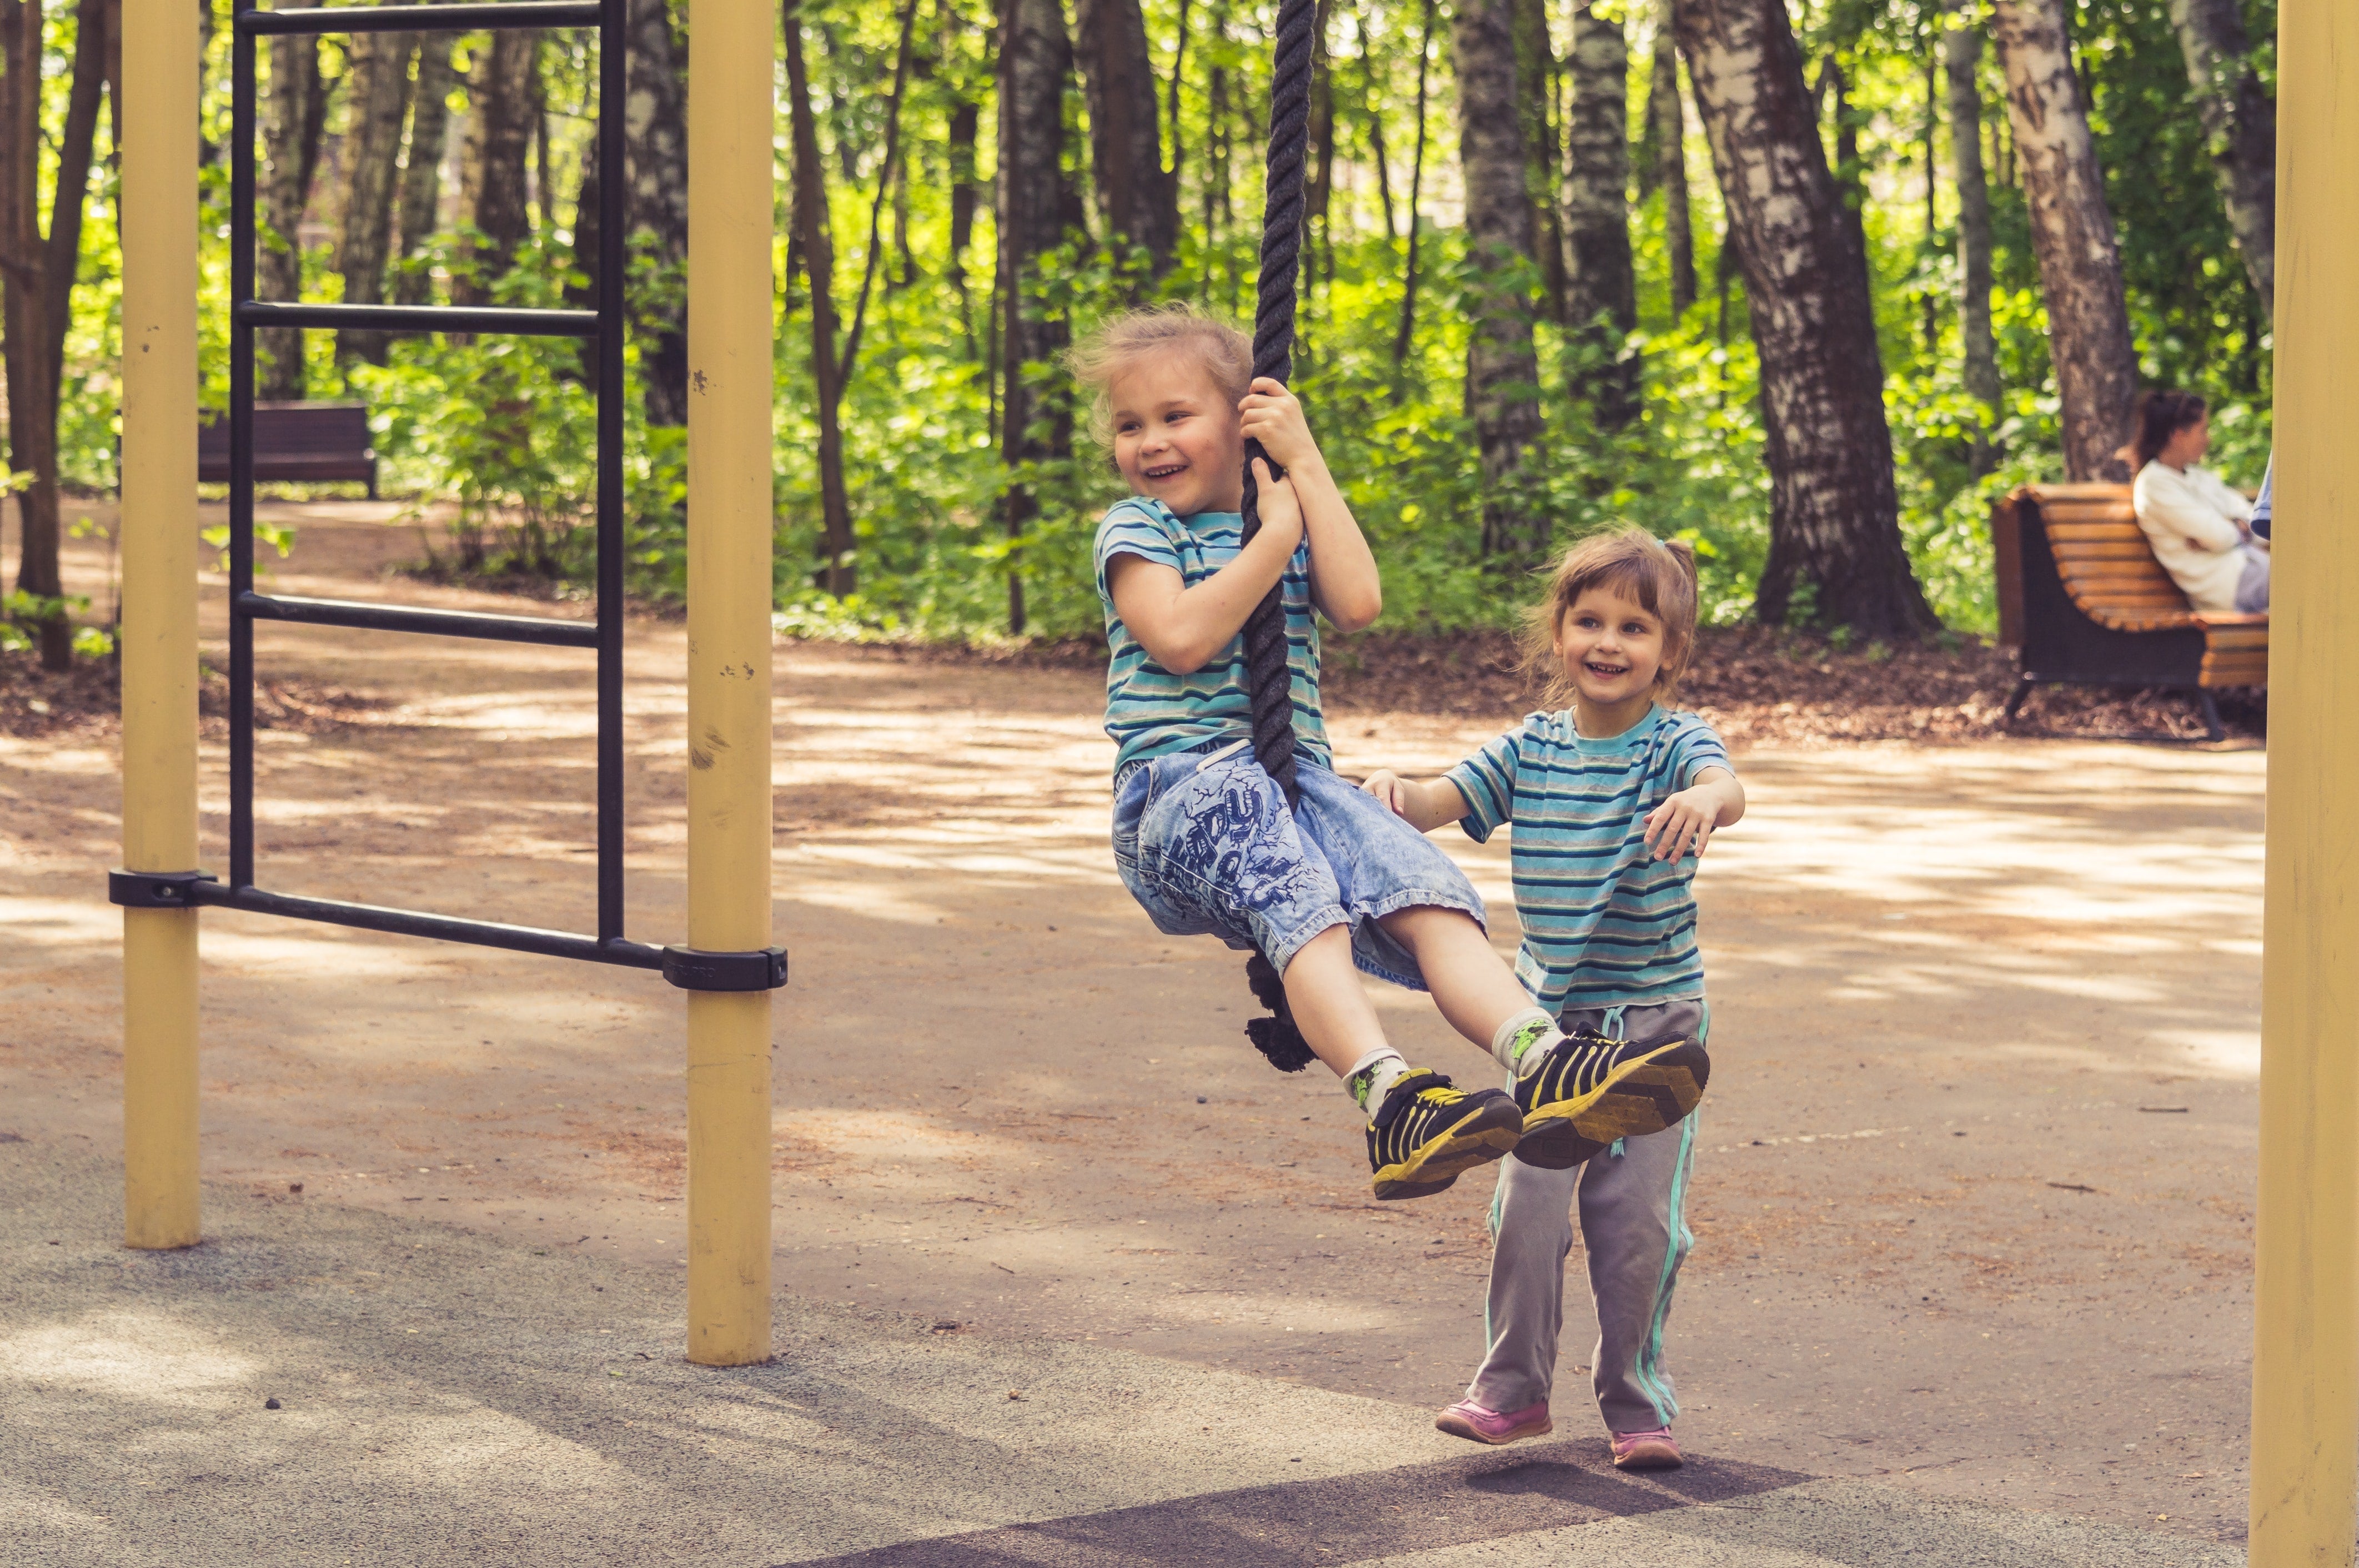 Factors to Consider When Choosing Playground Equipment - Simplified Playgrounds